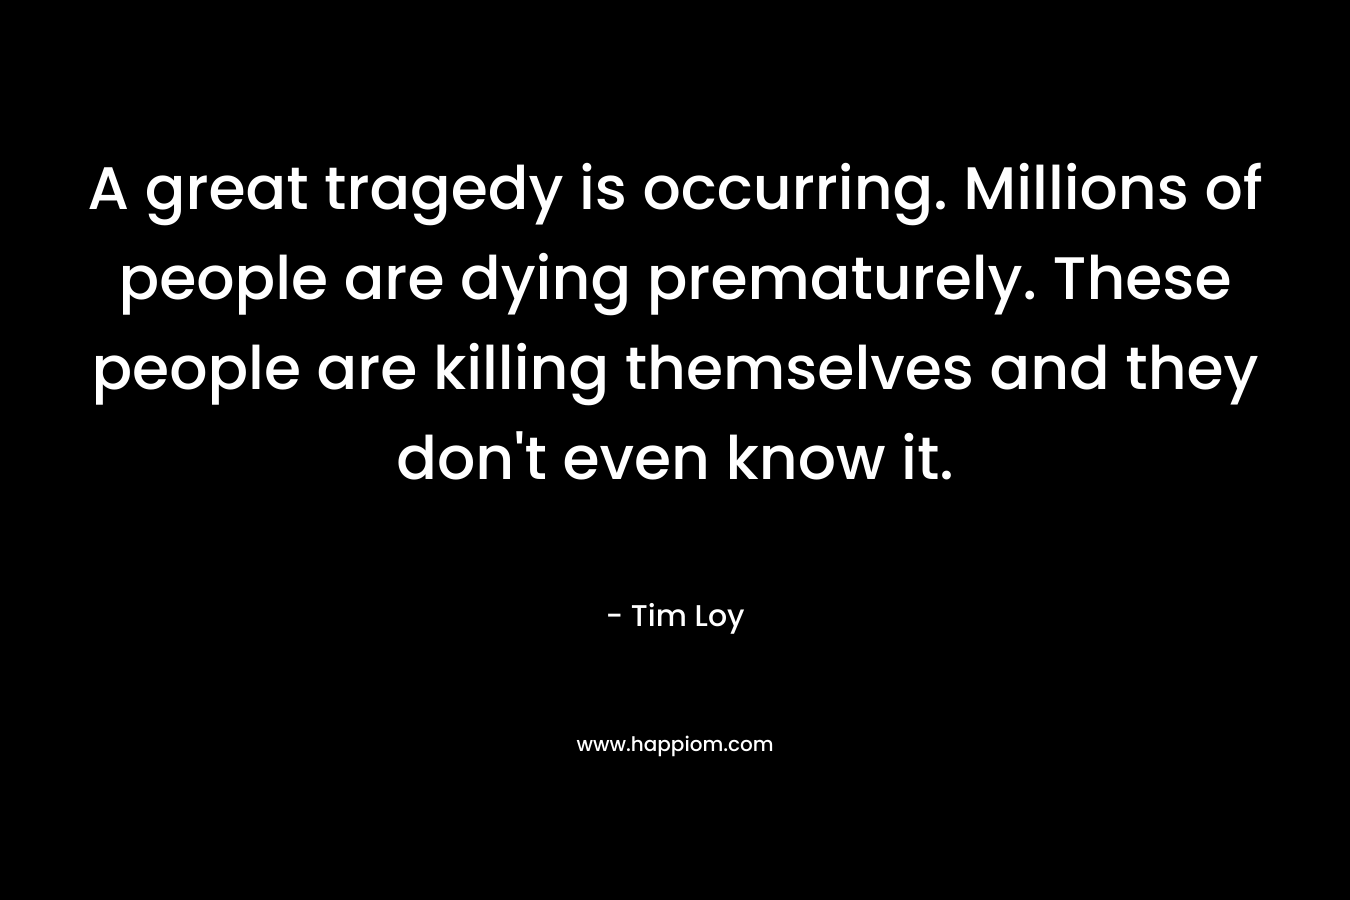 A great tragedy is occurring. Millions of people are dying prematurely. These people are killing themselves and they don’t even know it. – Tim Loy